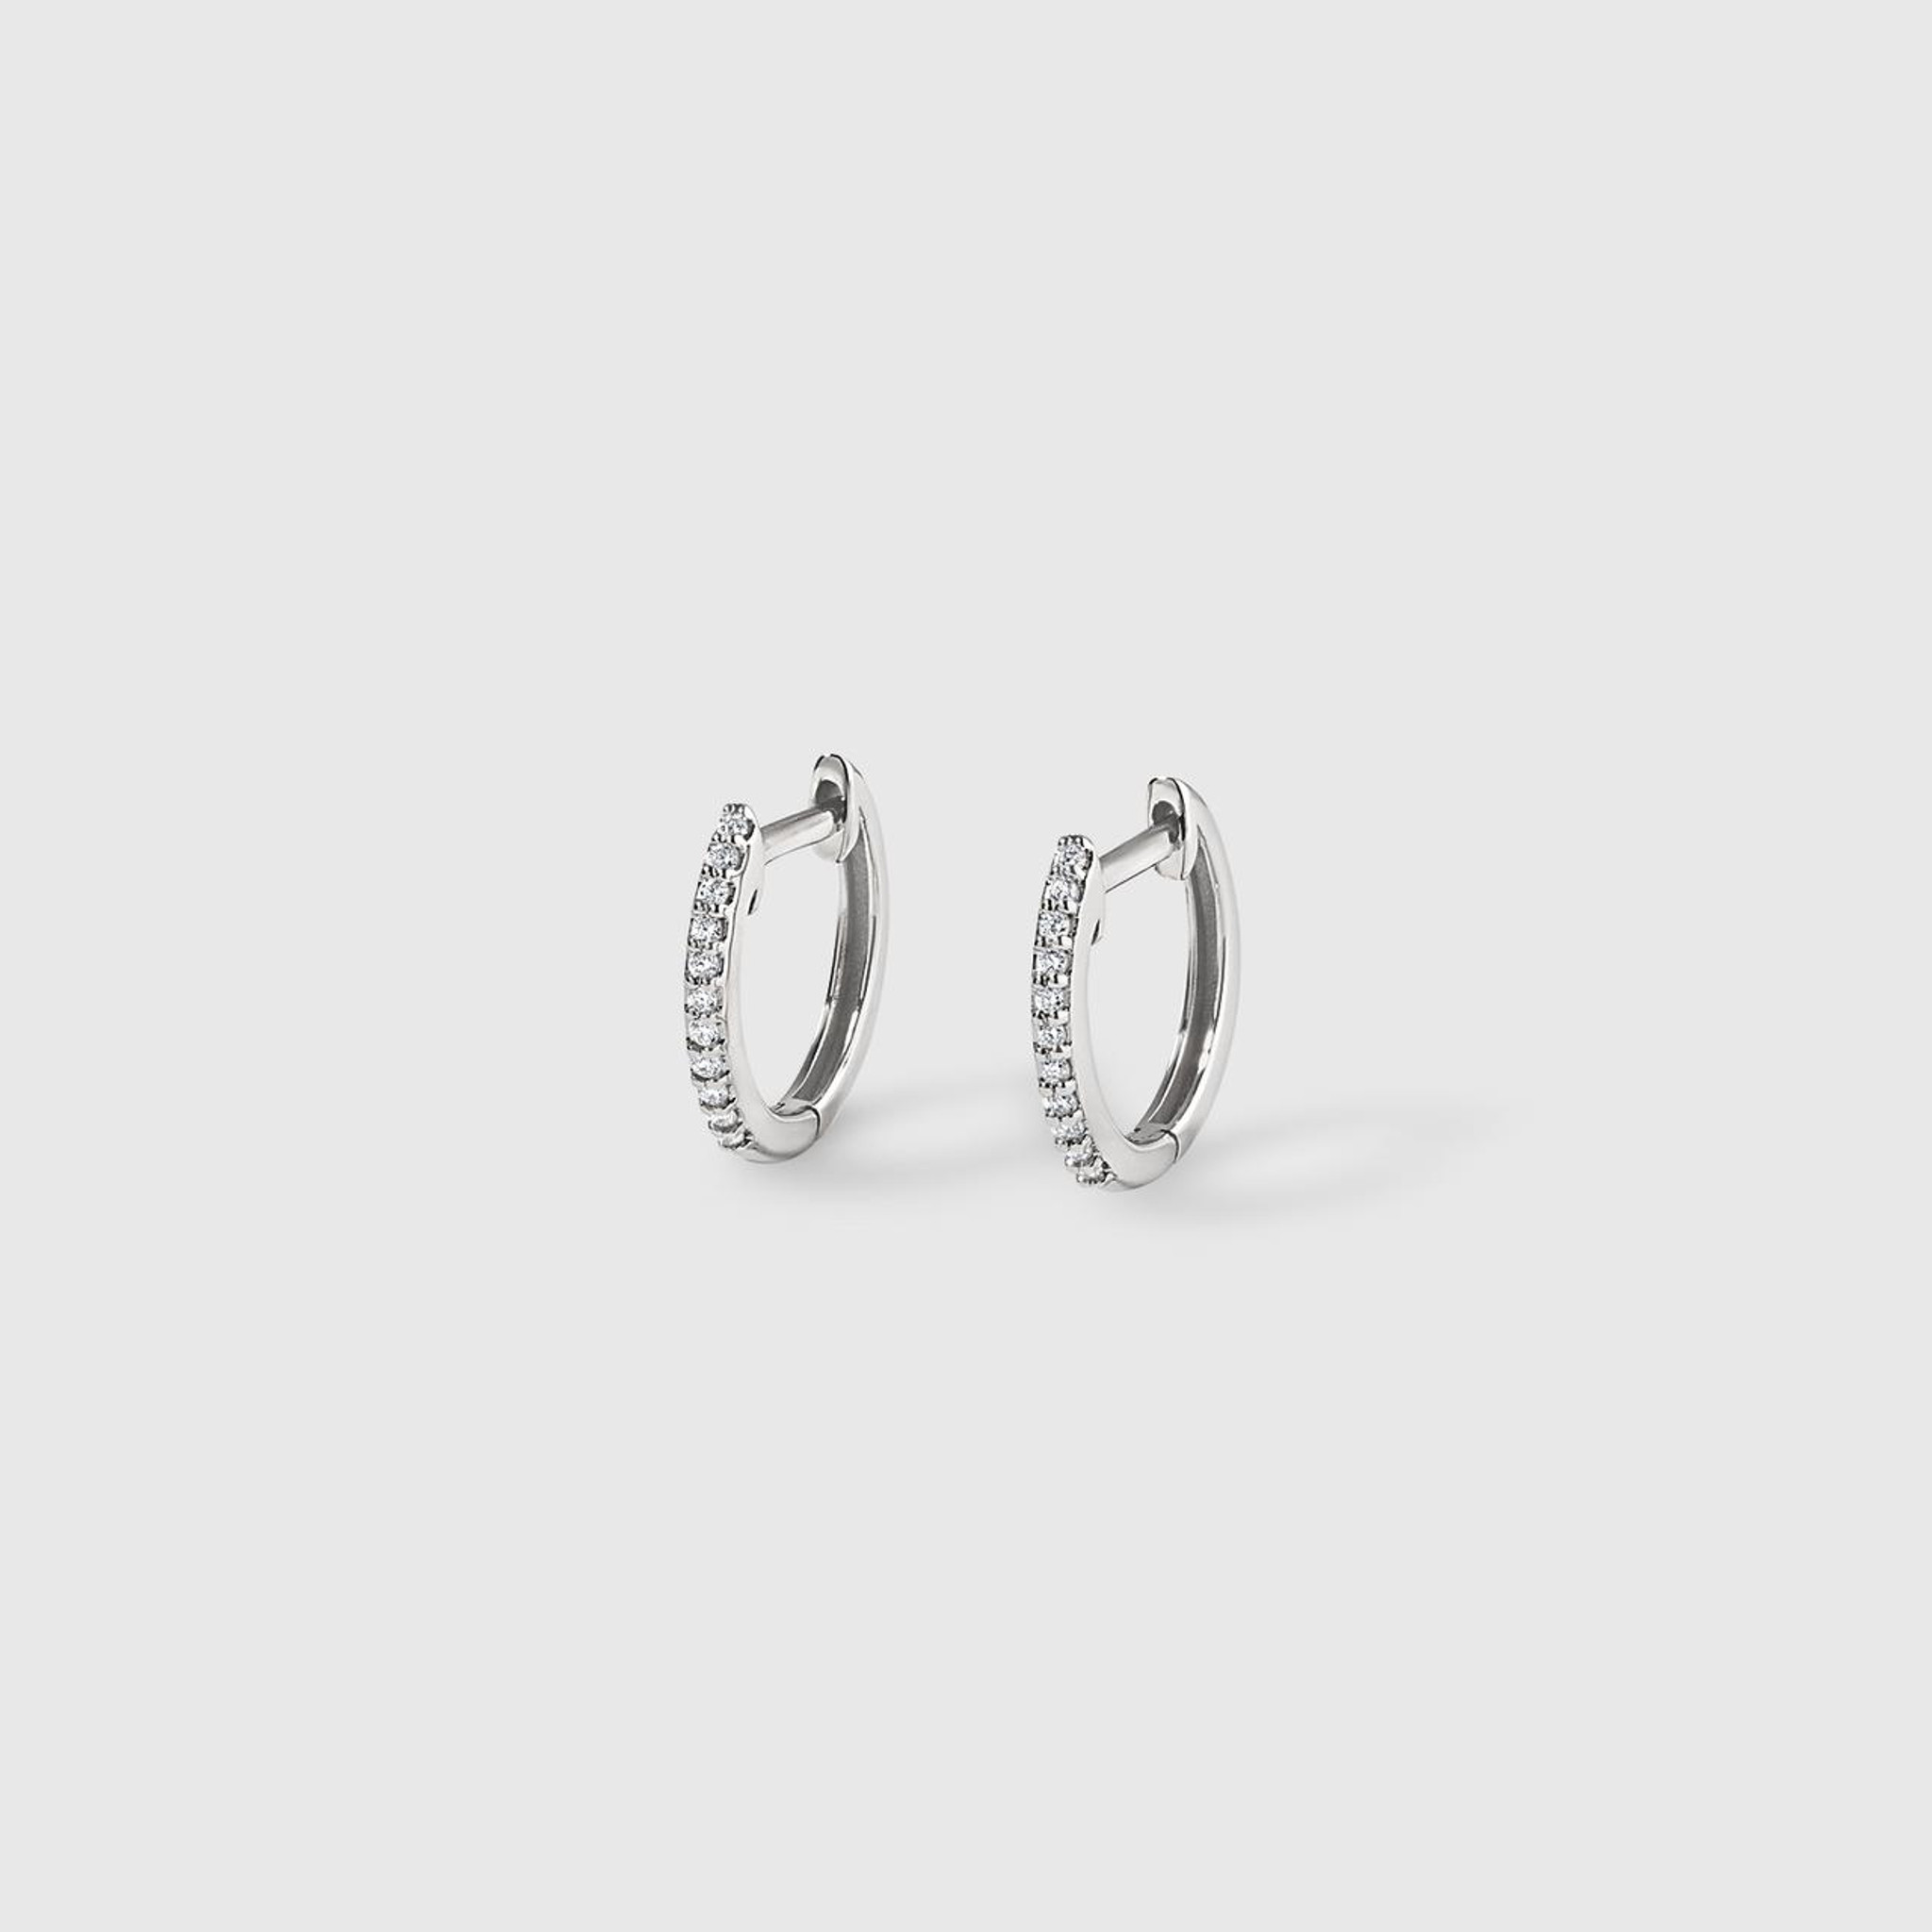 Classic, Small, 14kt White Gold Diamond Hoop Earrings. These stunners are small yet sure to make a statement day or night.  By Sophia by Design of Cherry Hill, NJ.